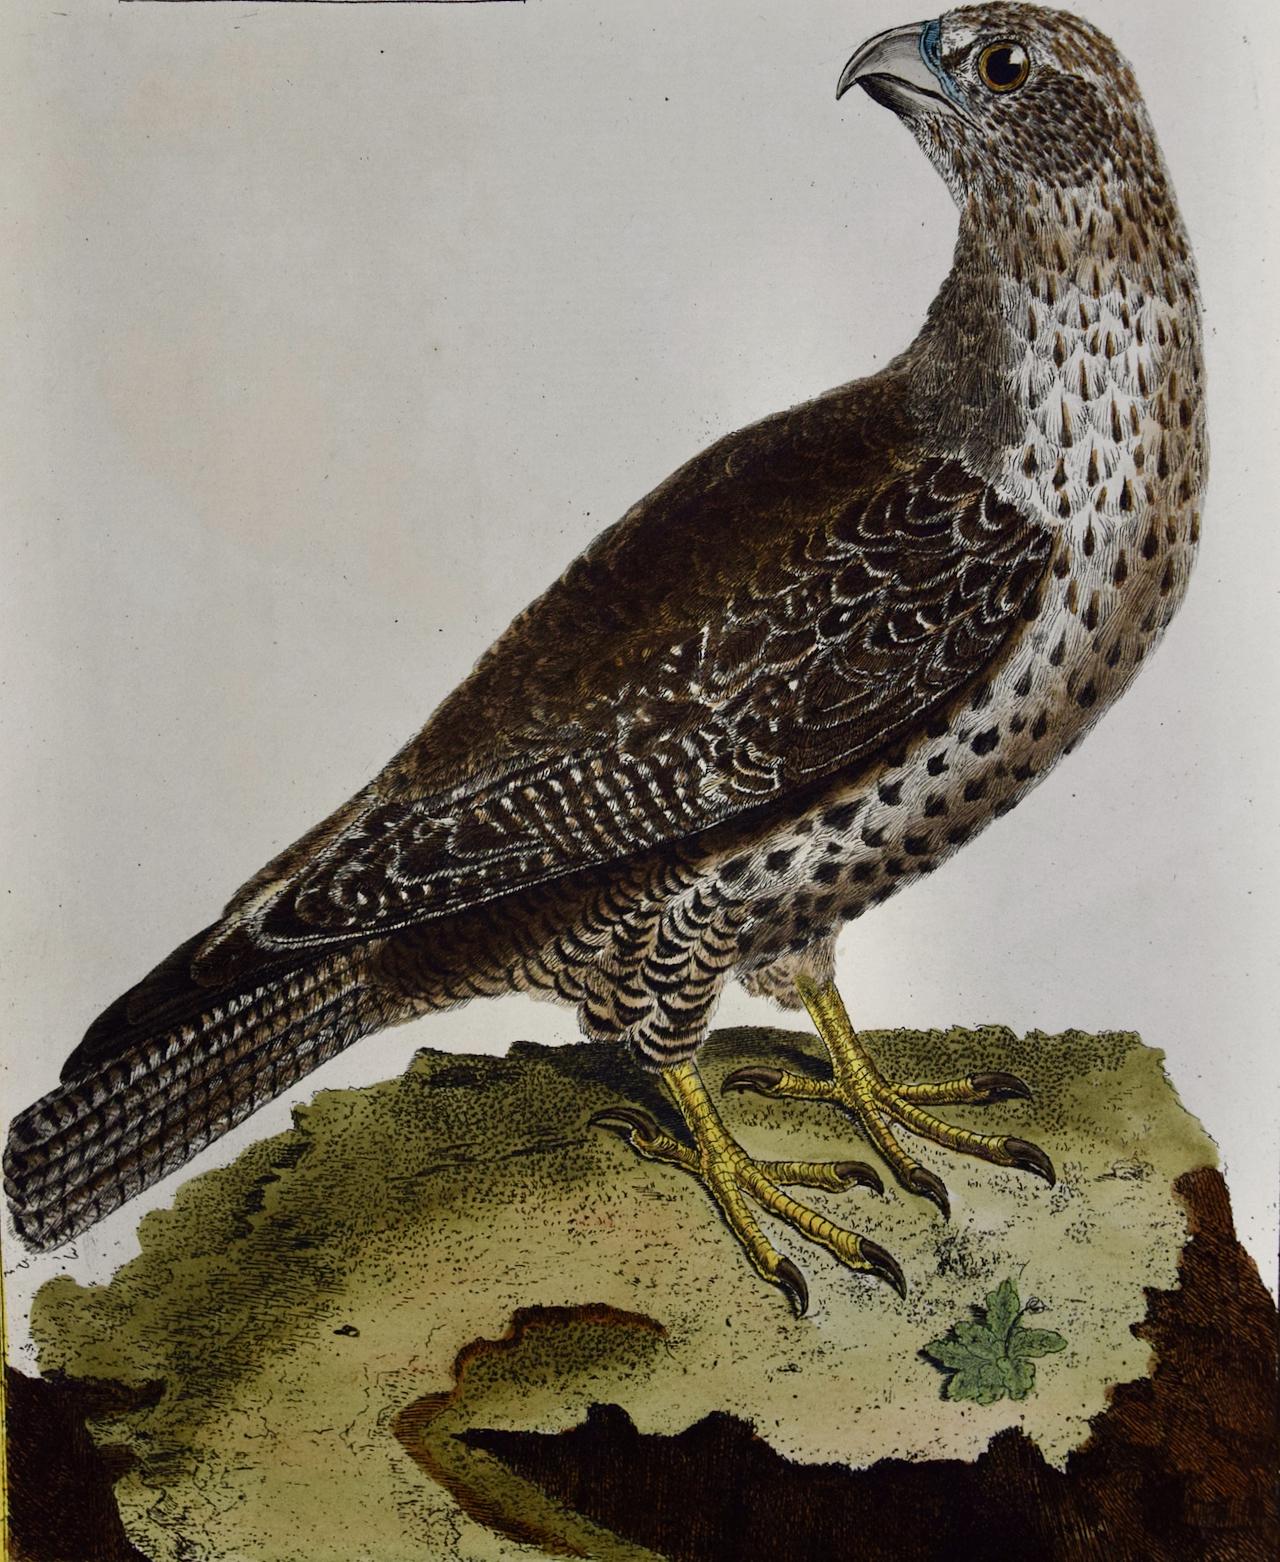 An Icelandic GyrFalcon: An 18th Century Hand-colored Engraving by Martinet - Naturalistic Print by Francois Nicolas Martinet